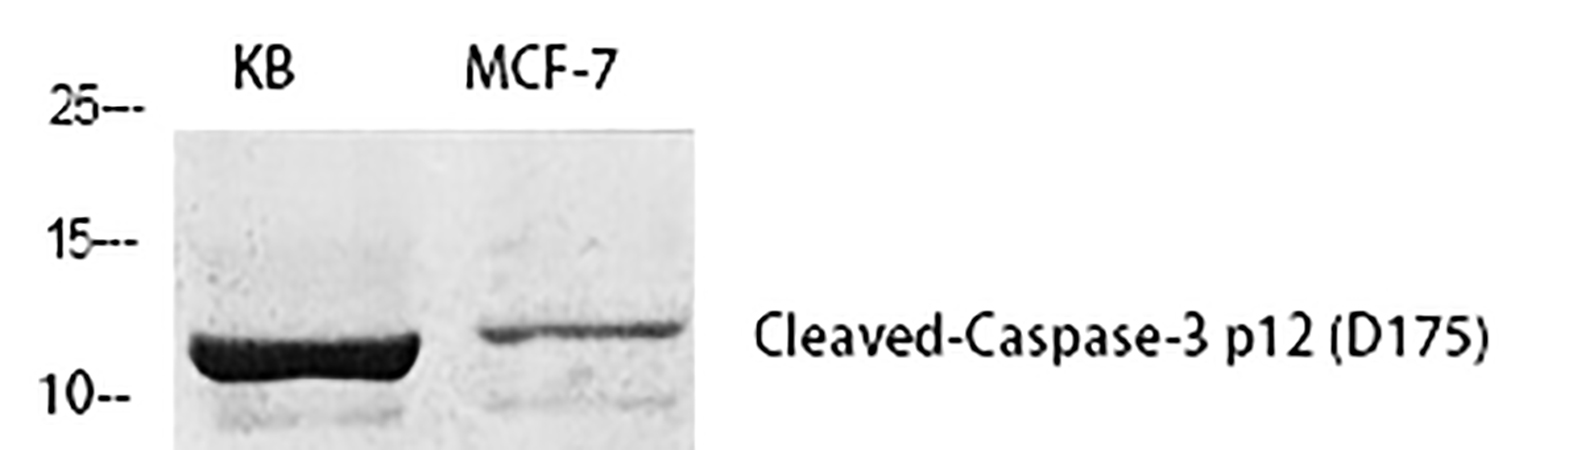 Fig.1. Western Blot analysis of KB(1), MCF-7(2), diluted at 1:1000.